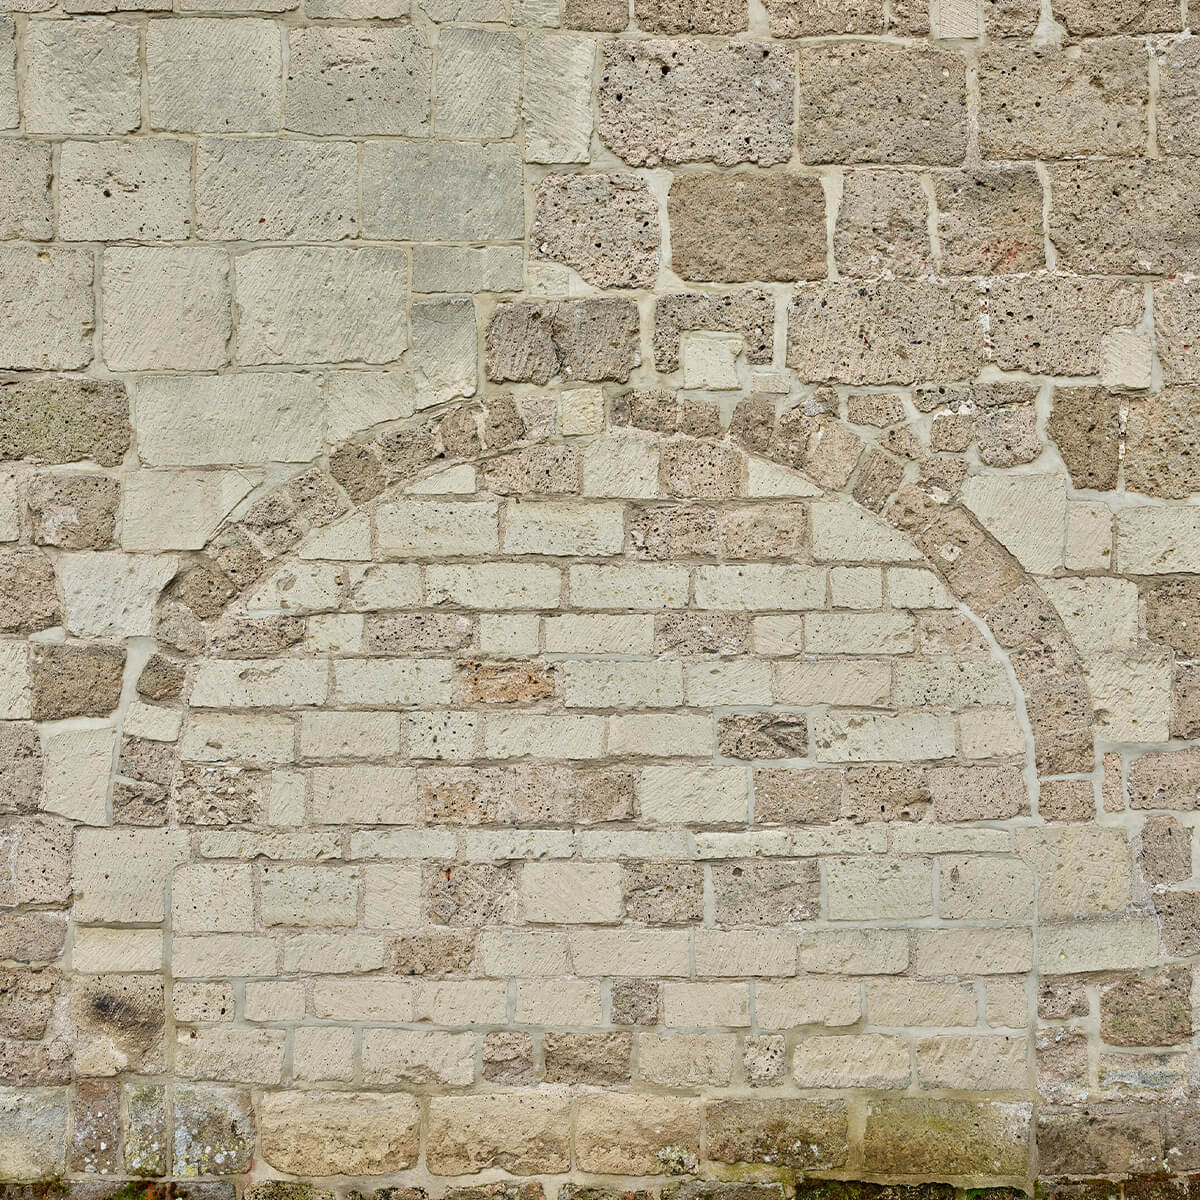 Old stone wall with arch